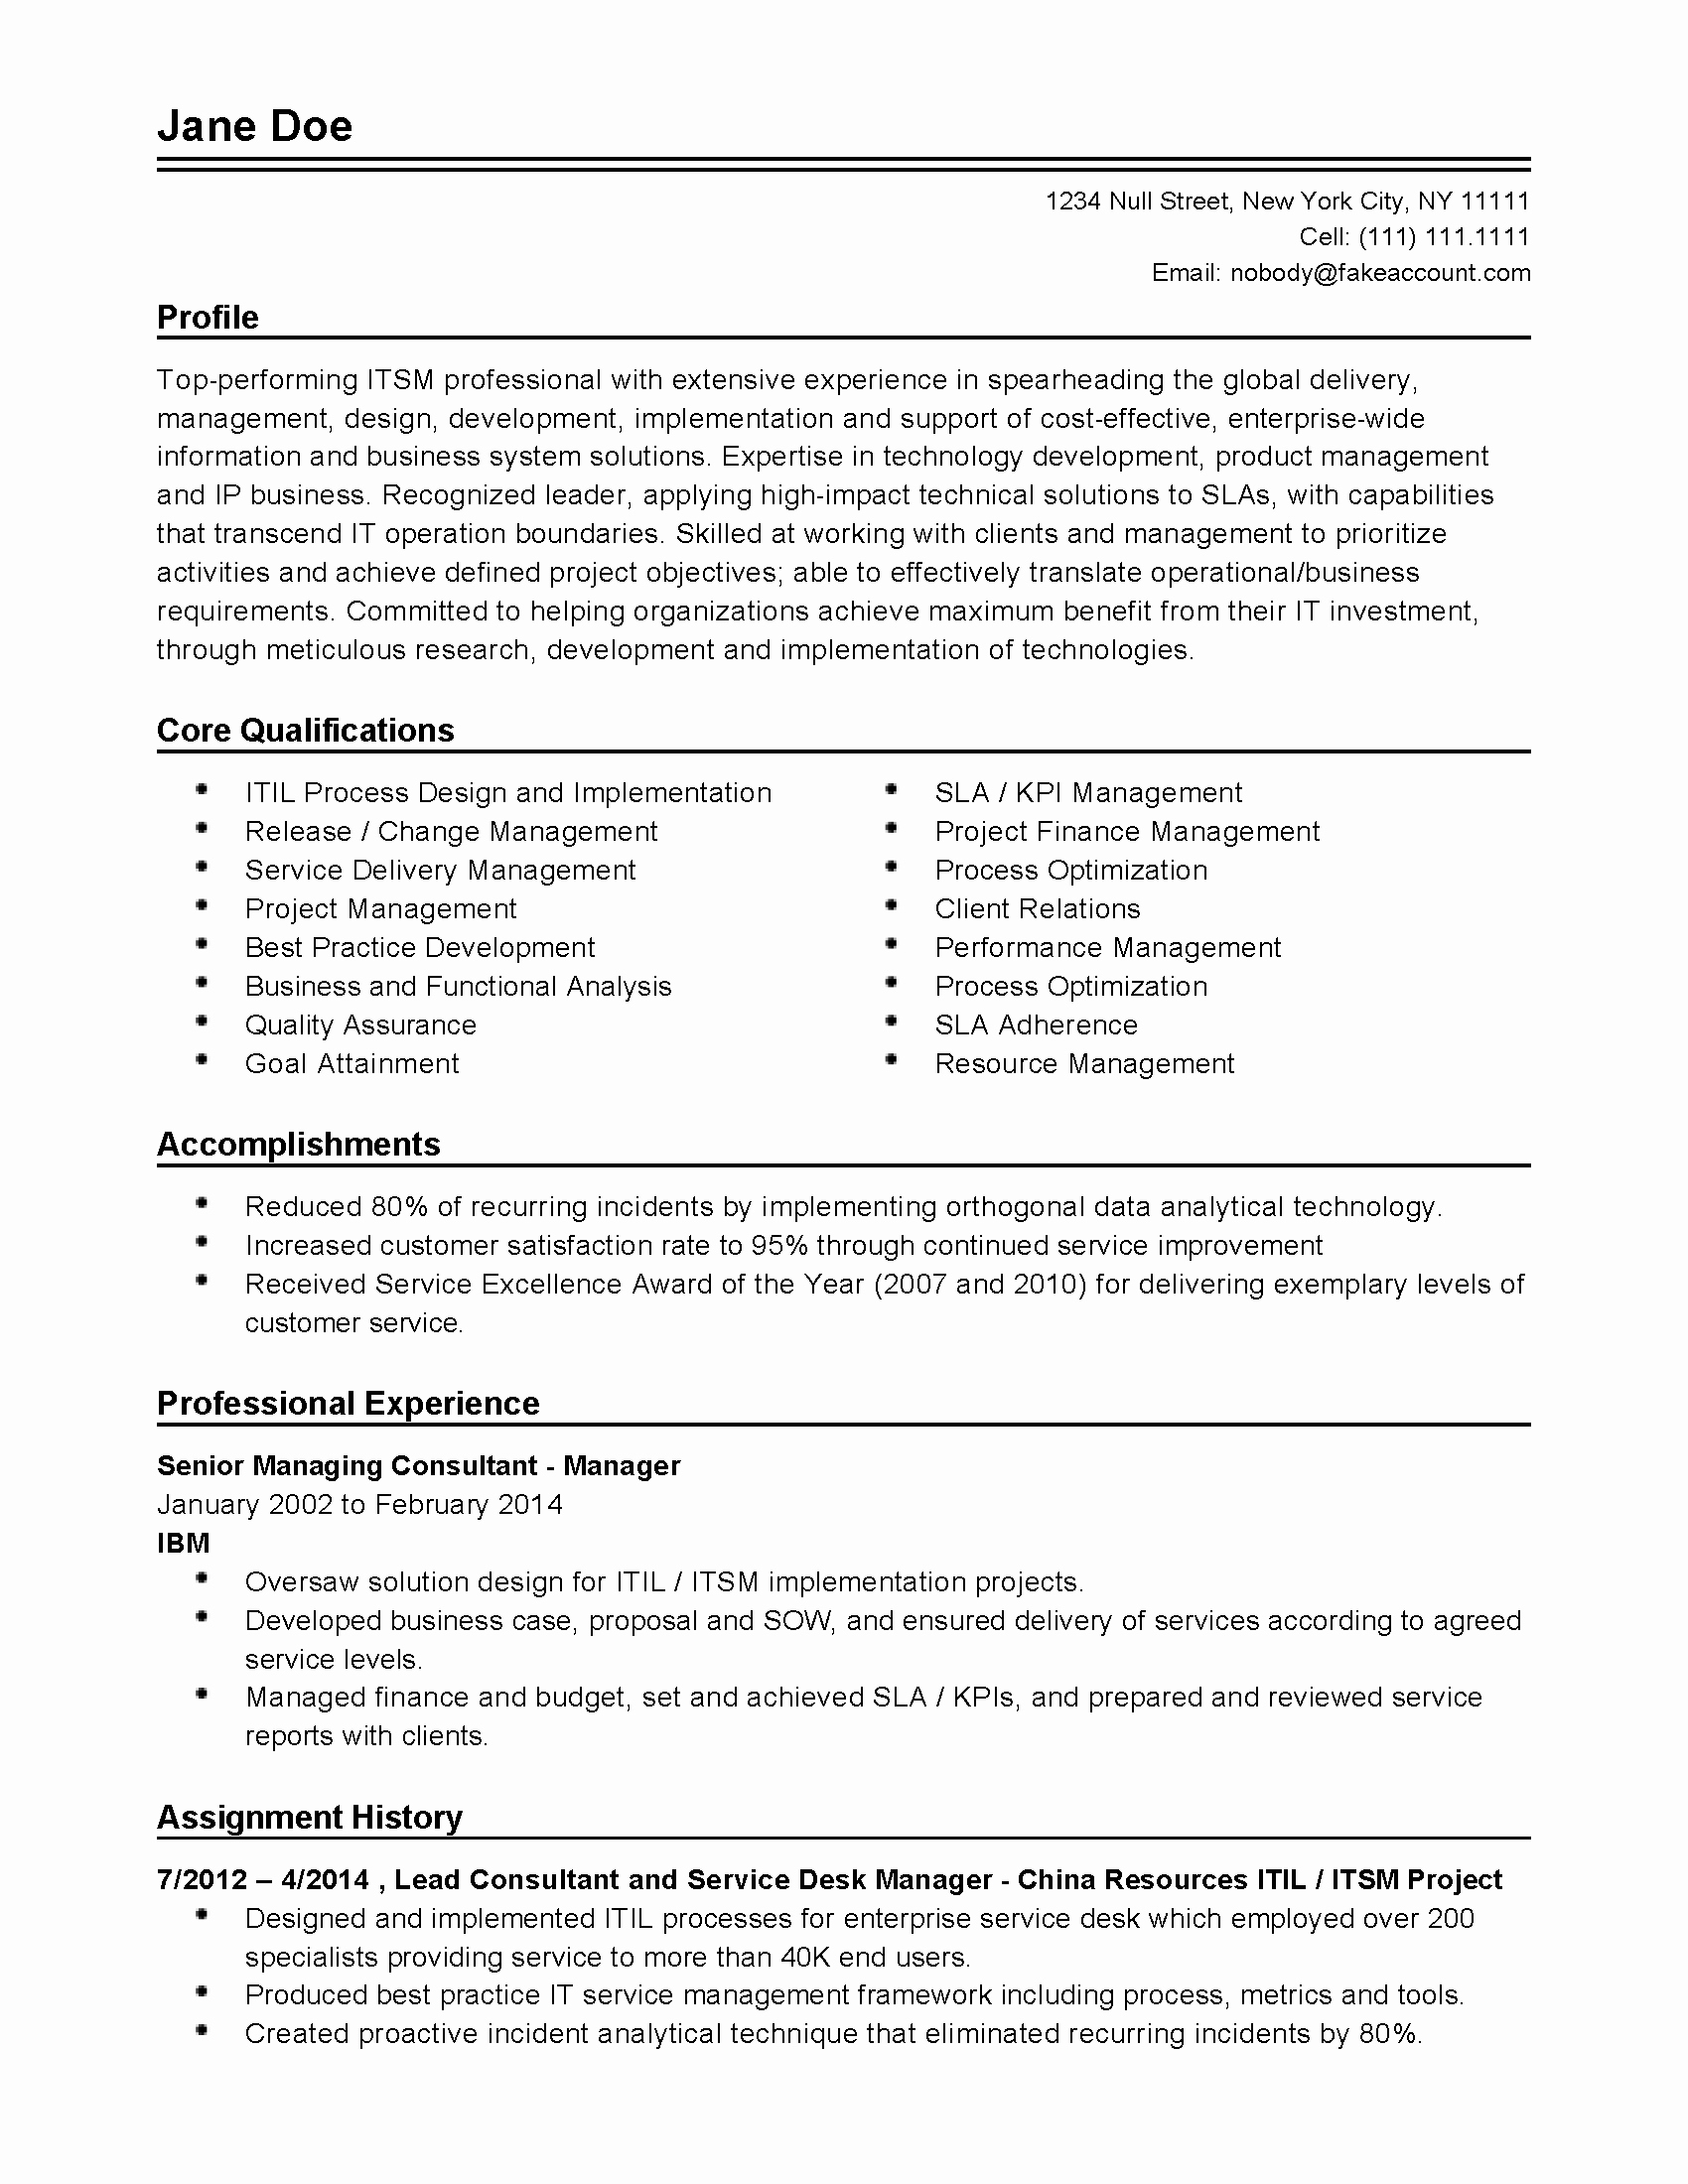 How to Create A Cover Letter Template - Cover Letter Example for Resume Beautiful Od Consultant Cover Letter